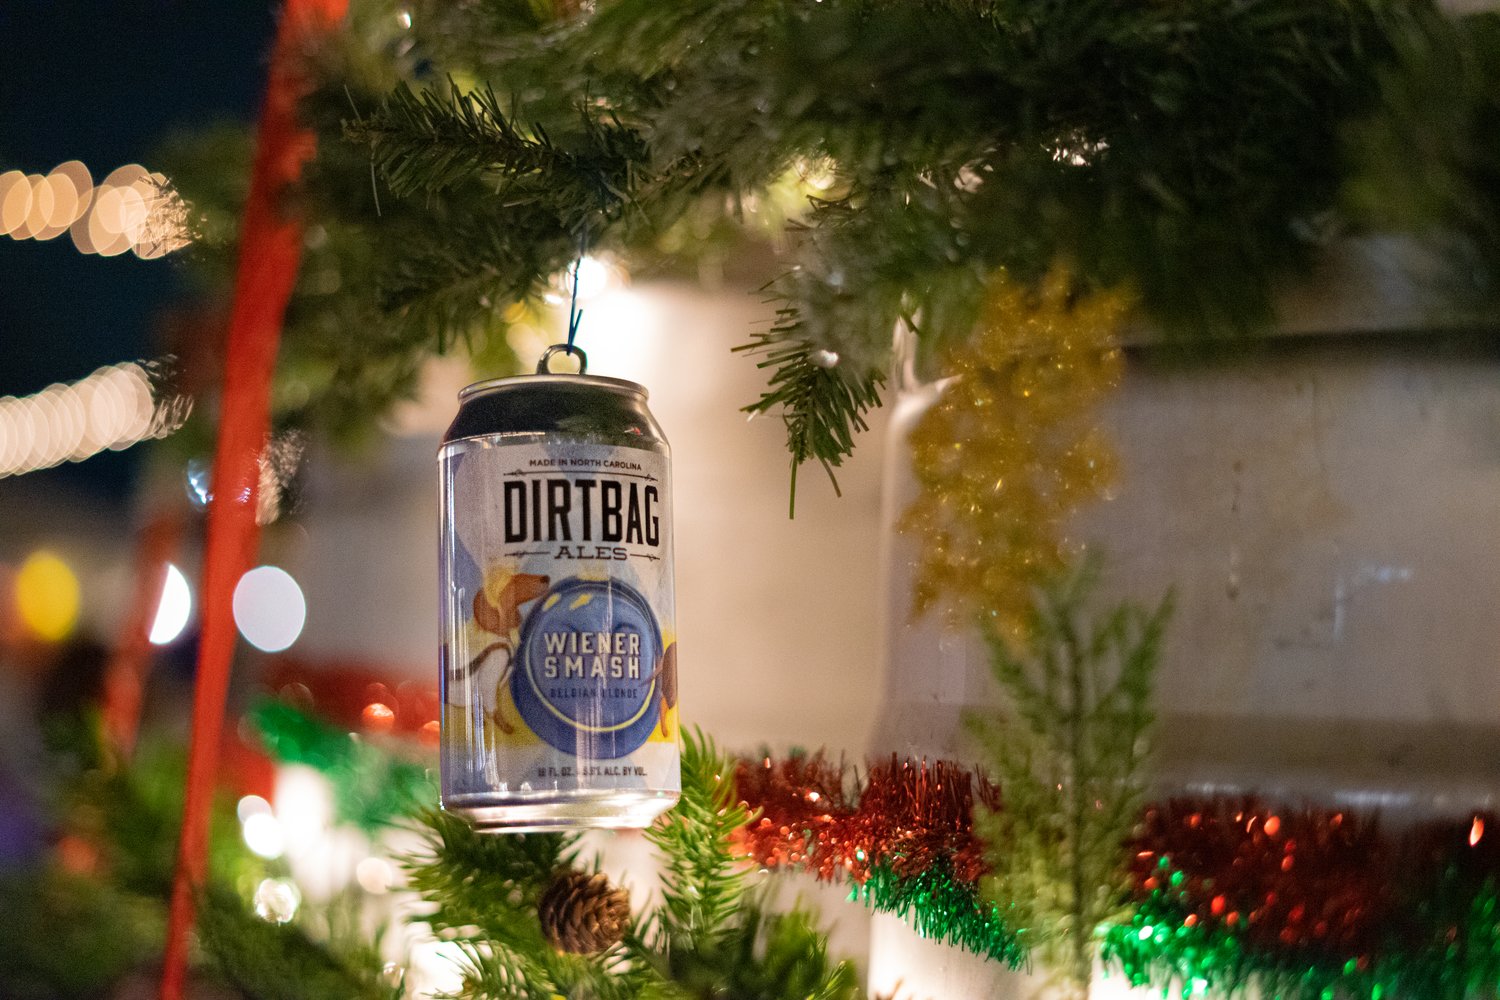 The German Christmas Market, hosted by Dirtbag Ales, was Dec. 9-11.